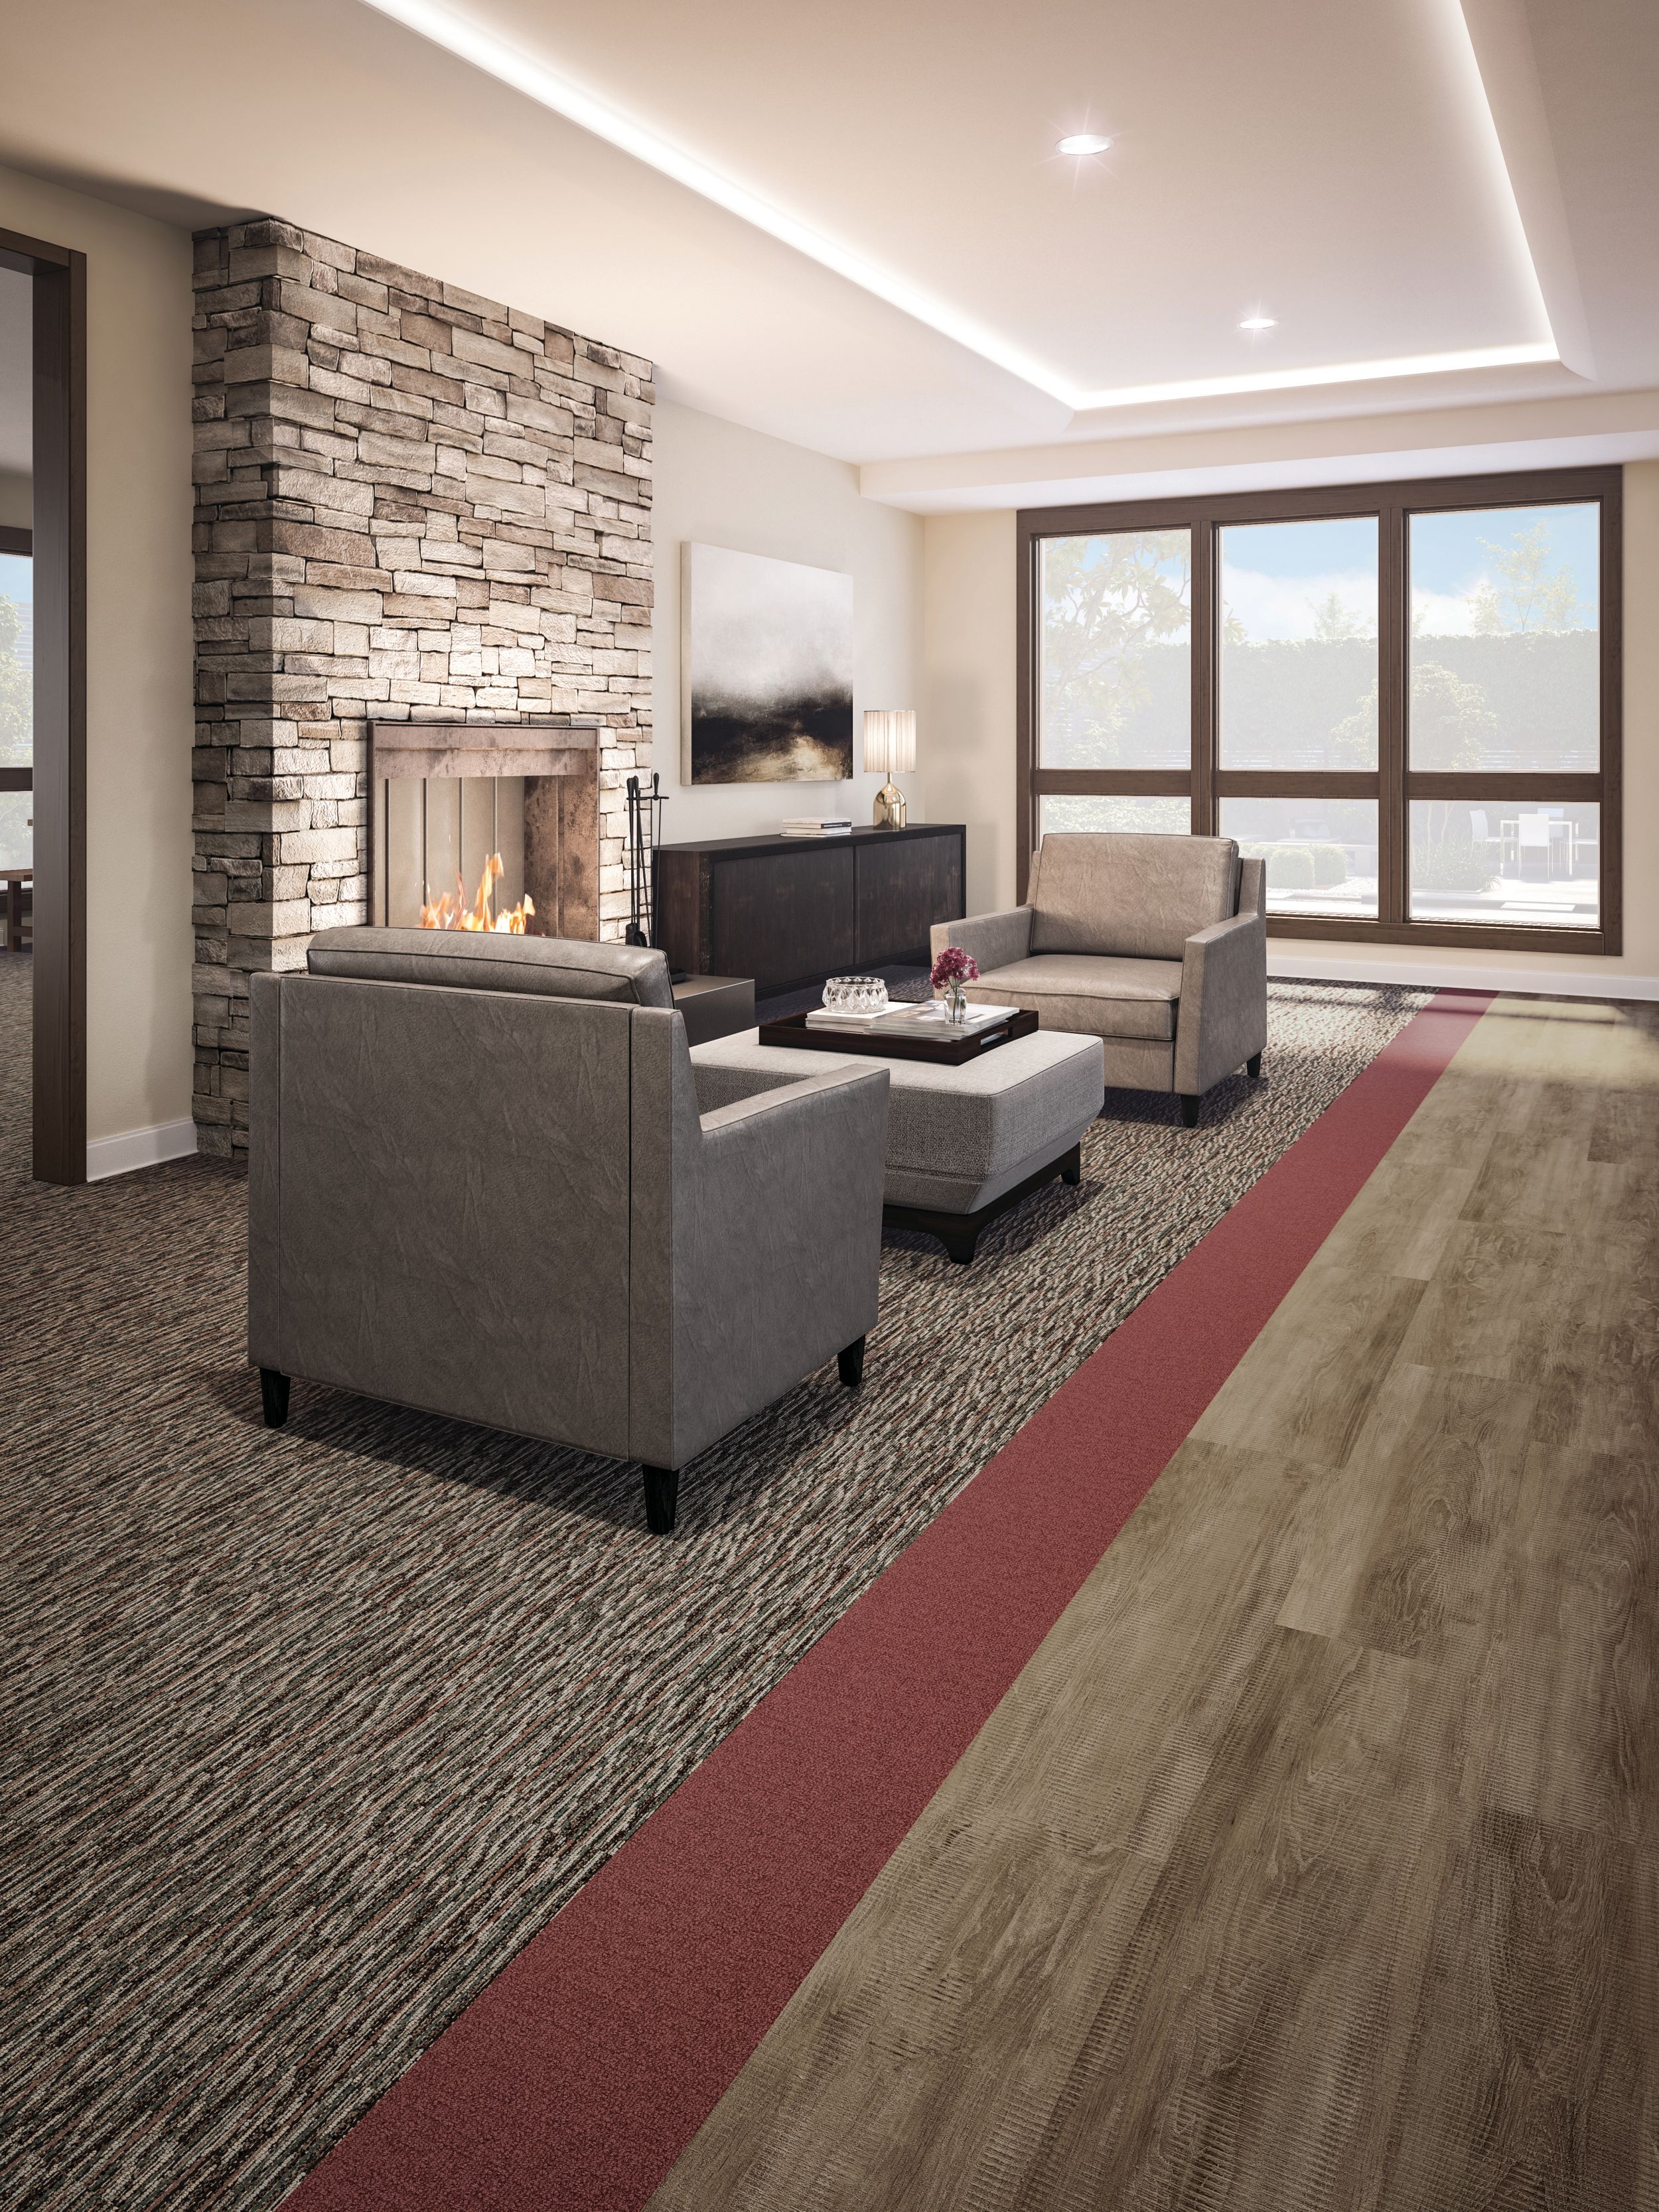 Interface Farmland and Monochrome carpet tile with Textured Woodograins LVT in senior housing seating area with stone fireplace image number 8